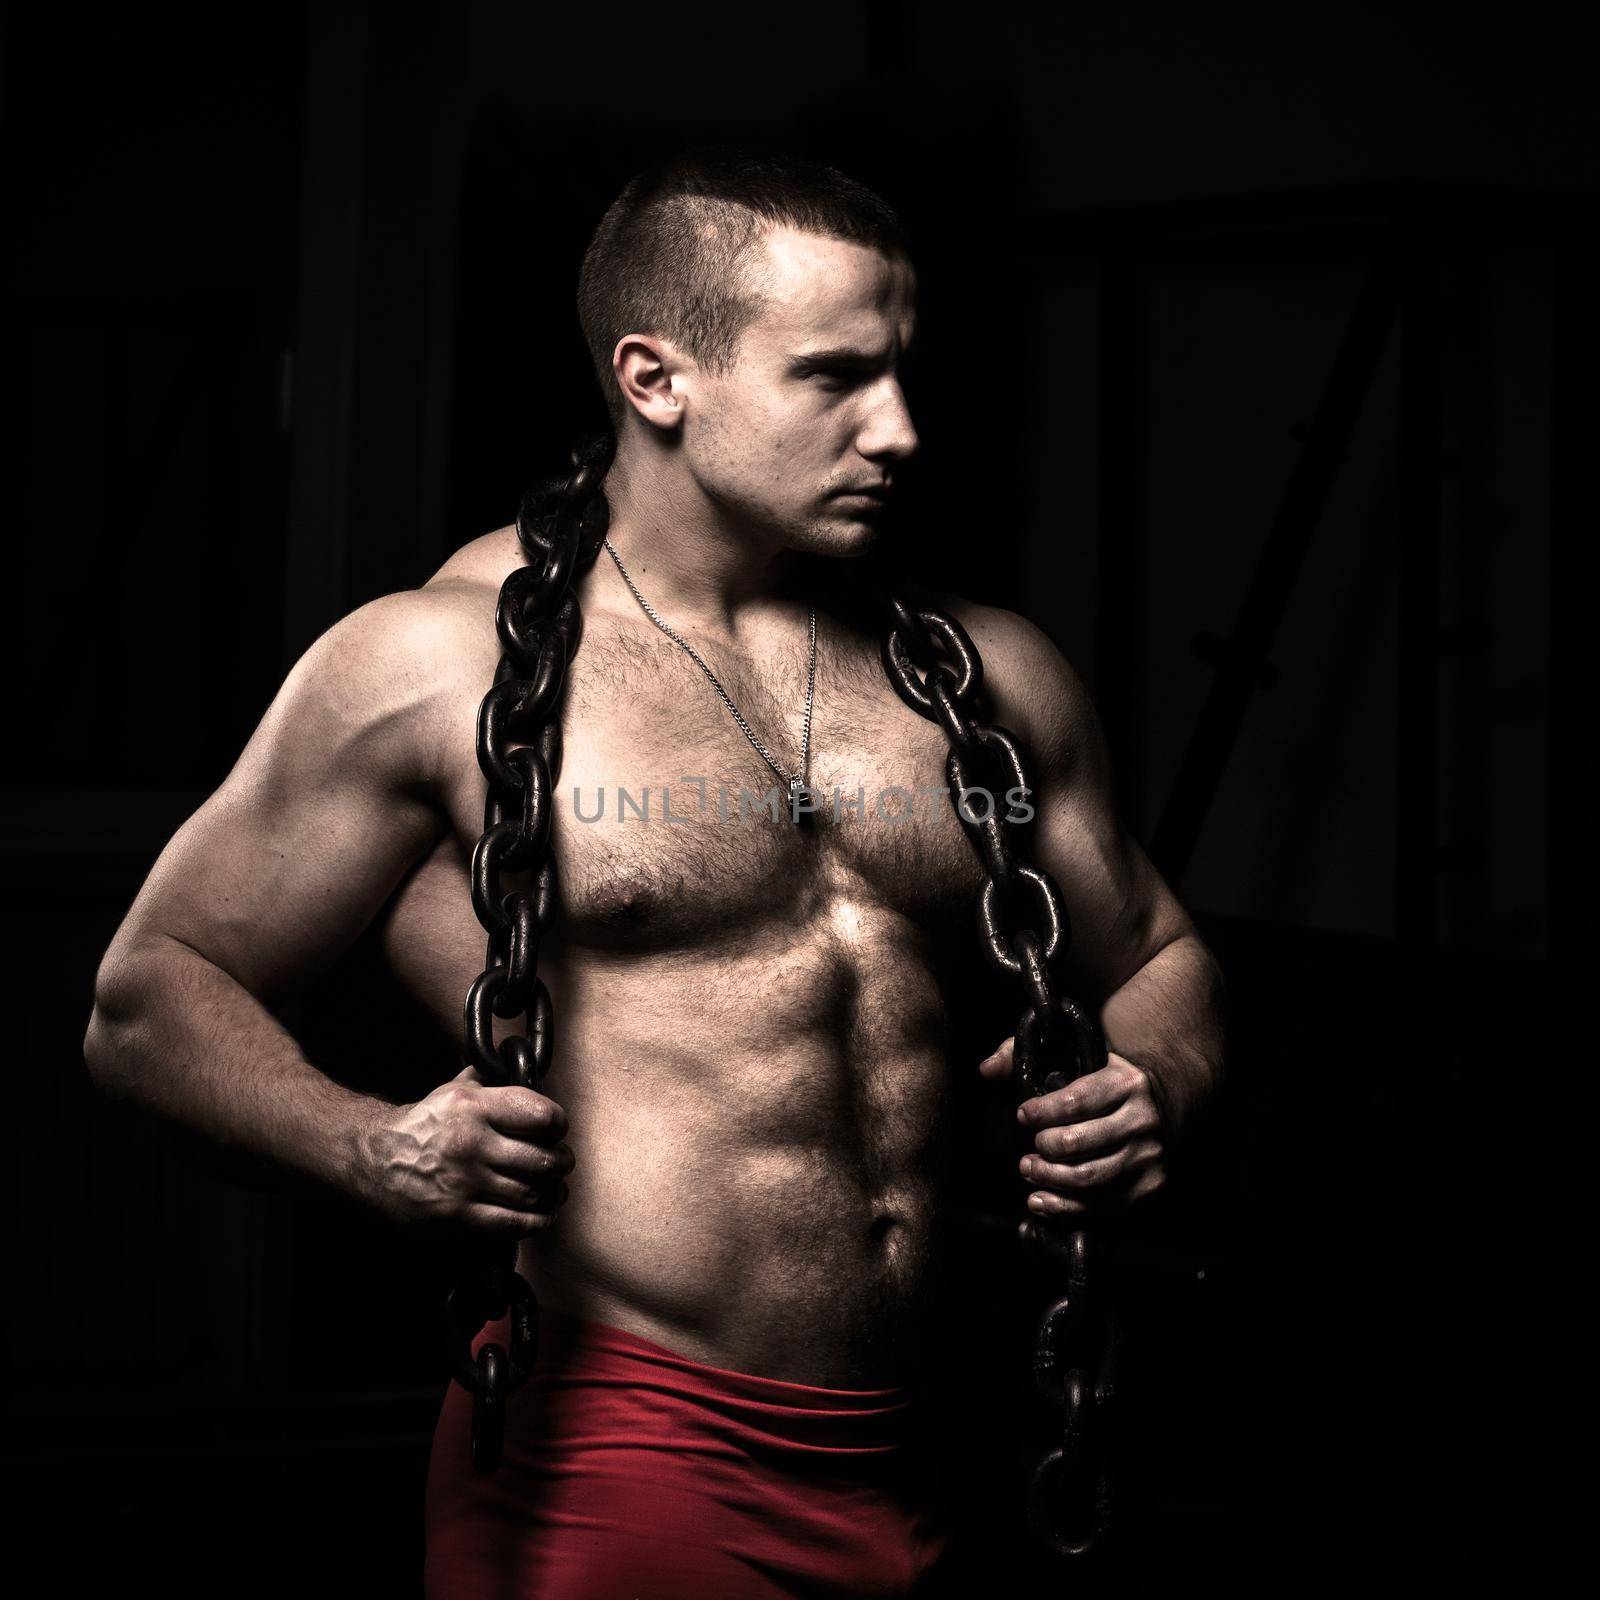 Portrait of a bodybuilder with a chain around his neck by SmartPhotoLab